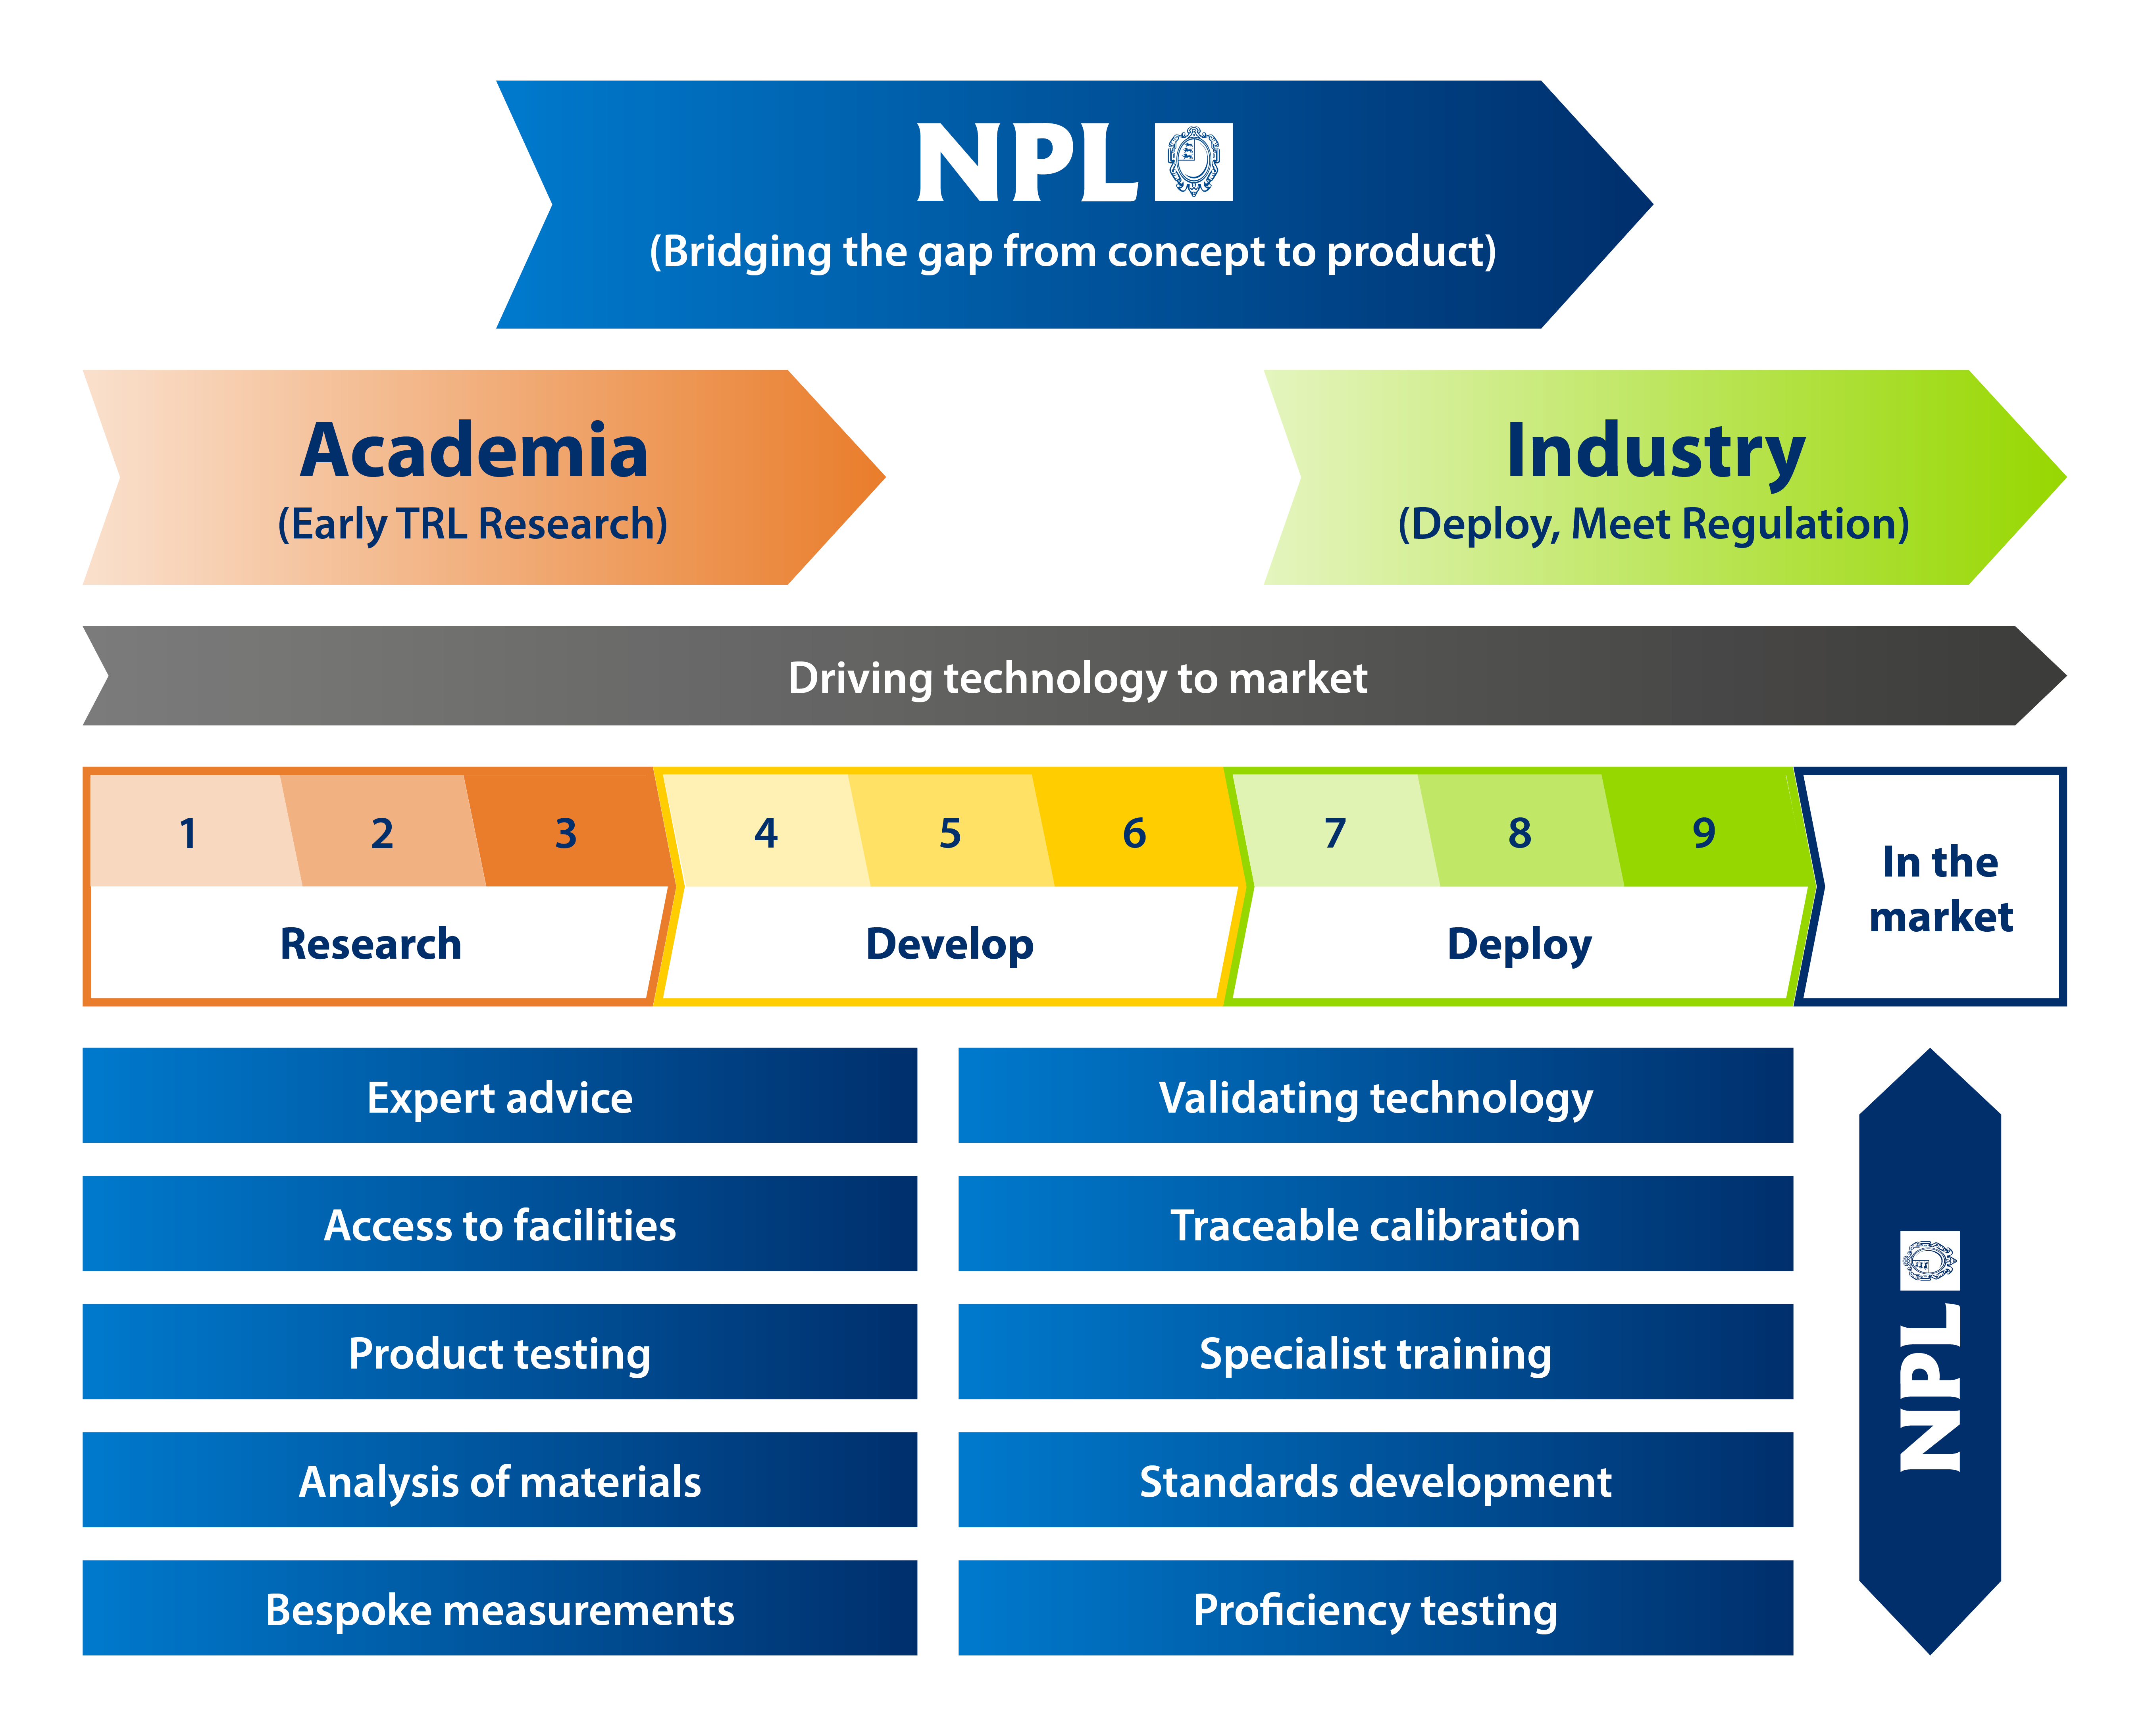 NPL drives technology to market by bridging the gap from product concept to deployment in the market